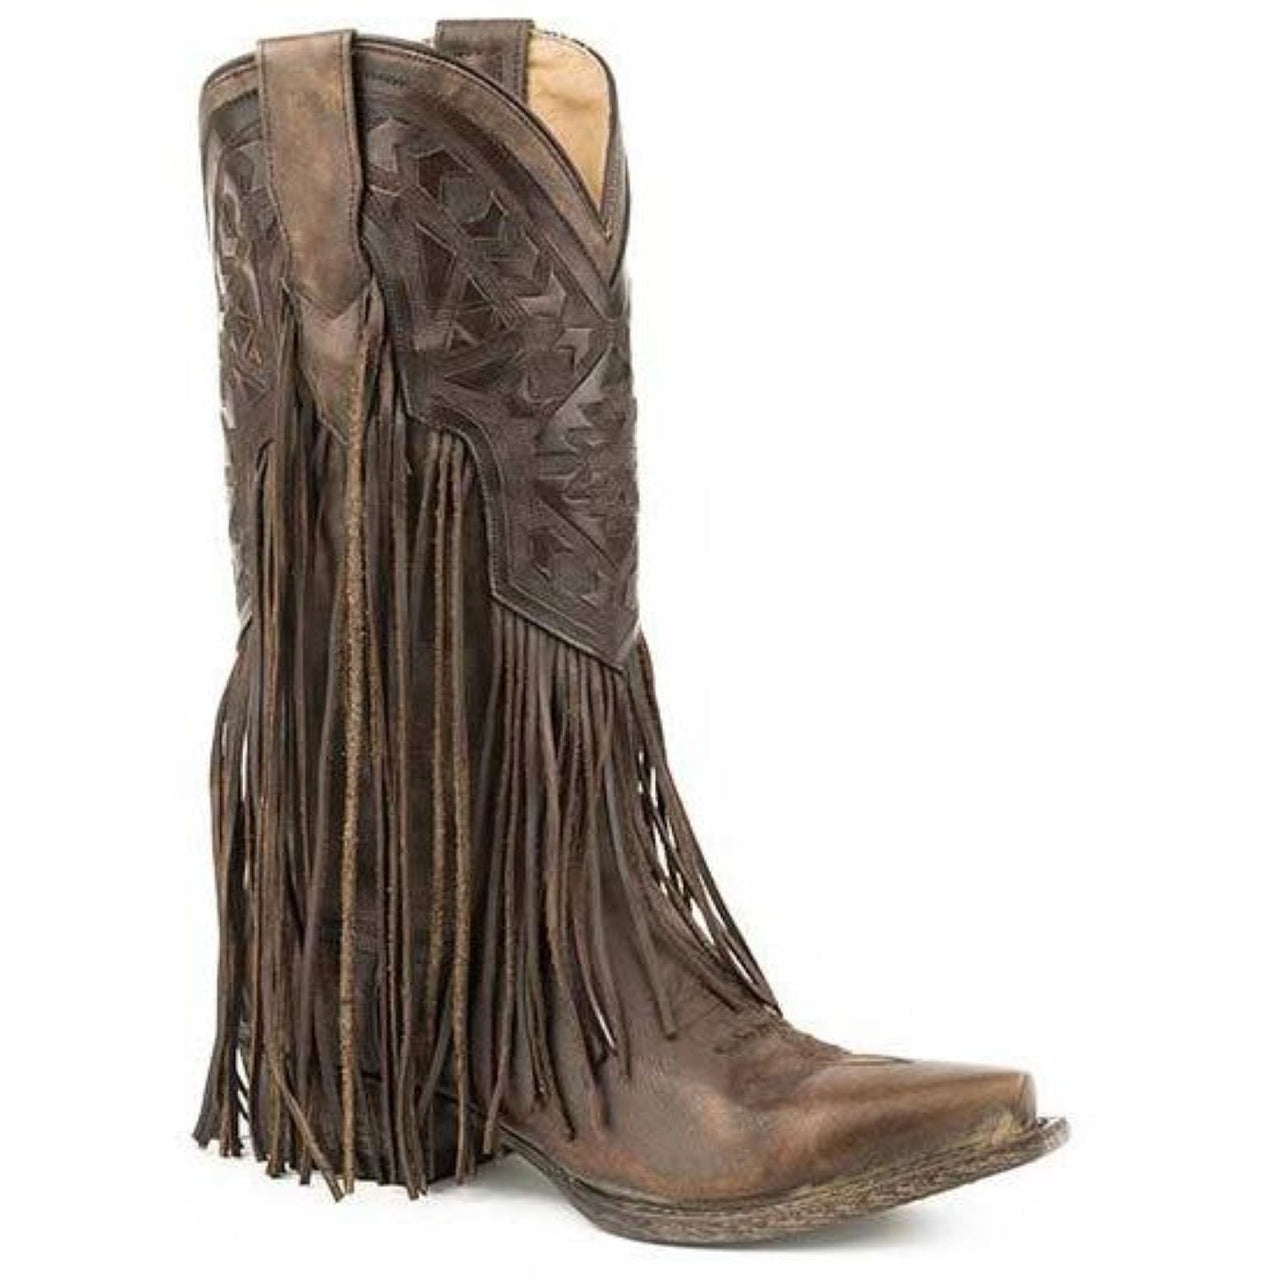 Women‚Äôs Stetson Sloane Leather Boots Handcrafted Brown - yeehawcowboy